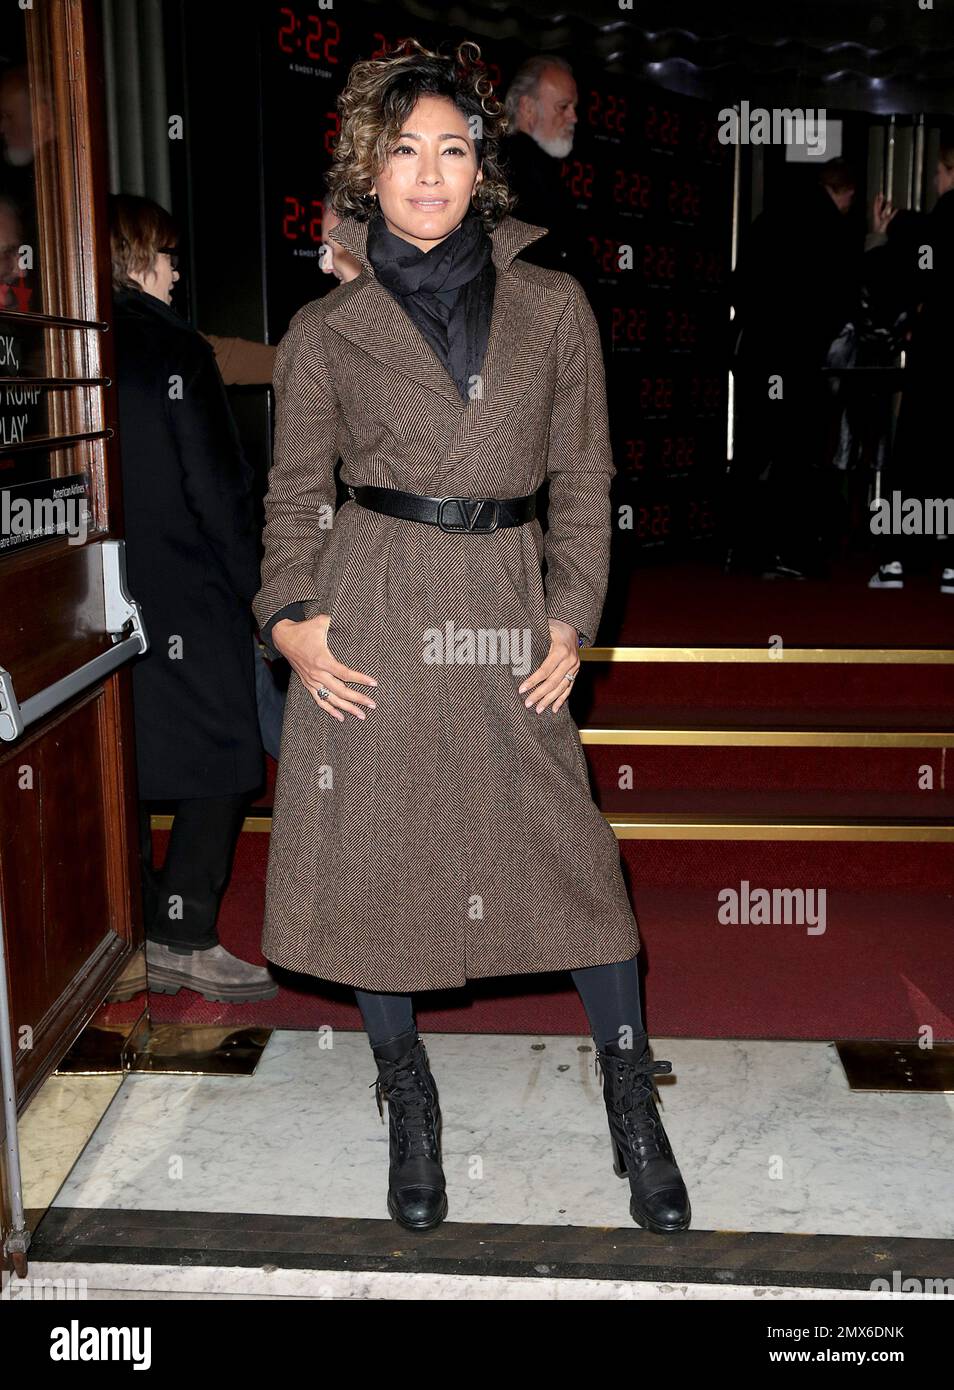 Feb 01, 2023 - London, England, UK - Karen Hauer attending the 2: 22 A Ghost Story Press Night at The Lyric Theatre Stock Photo